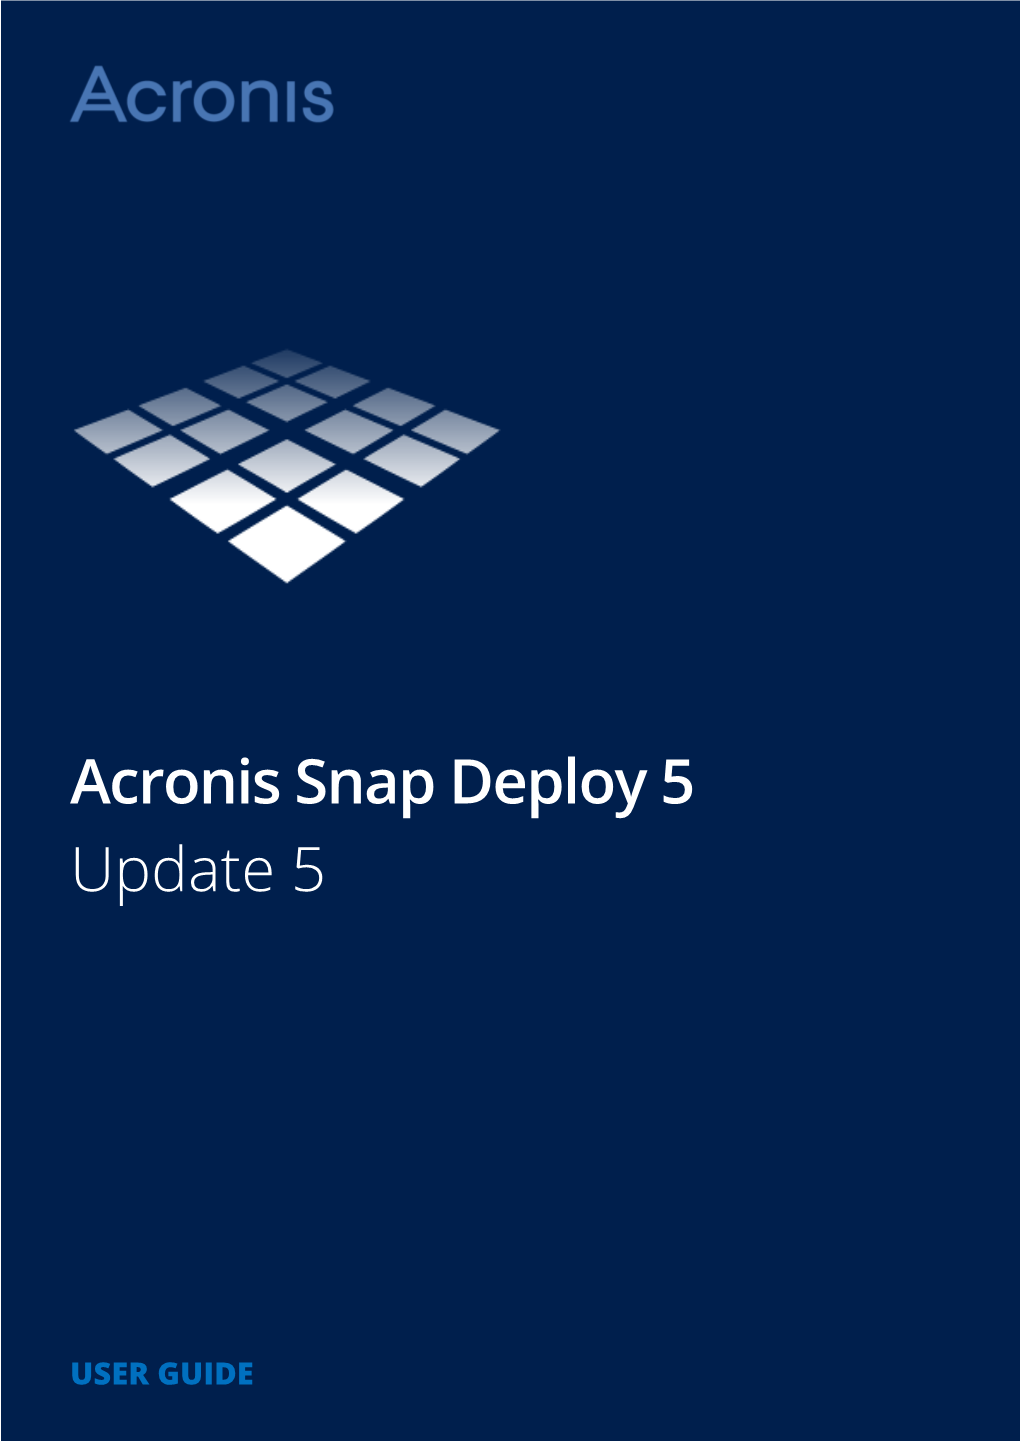 Acronis Snap Deploy 5 Update 5